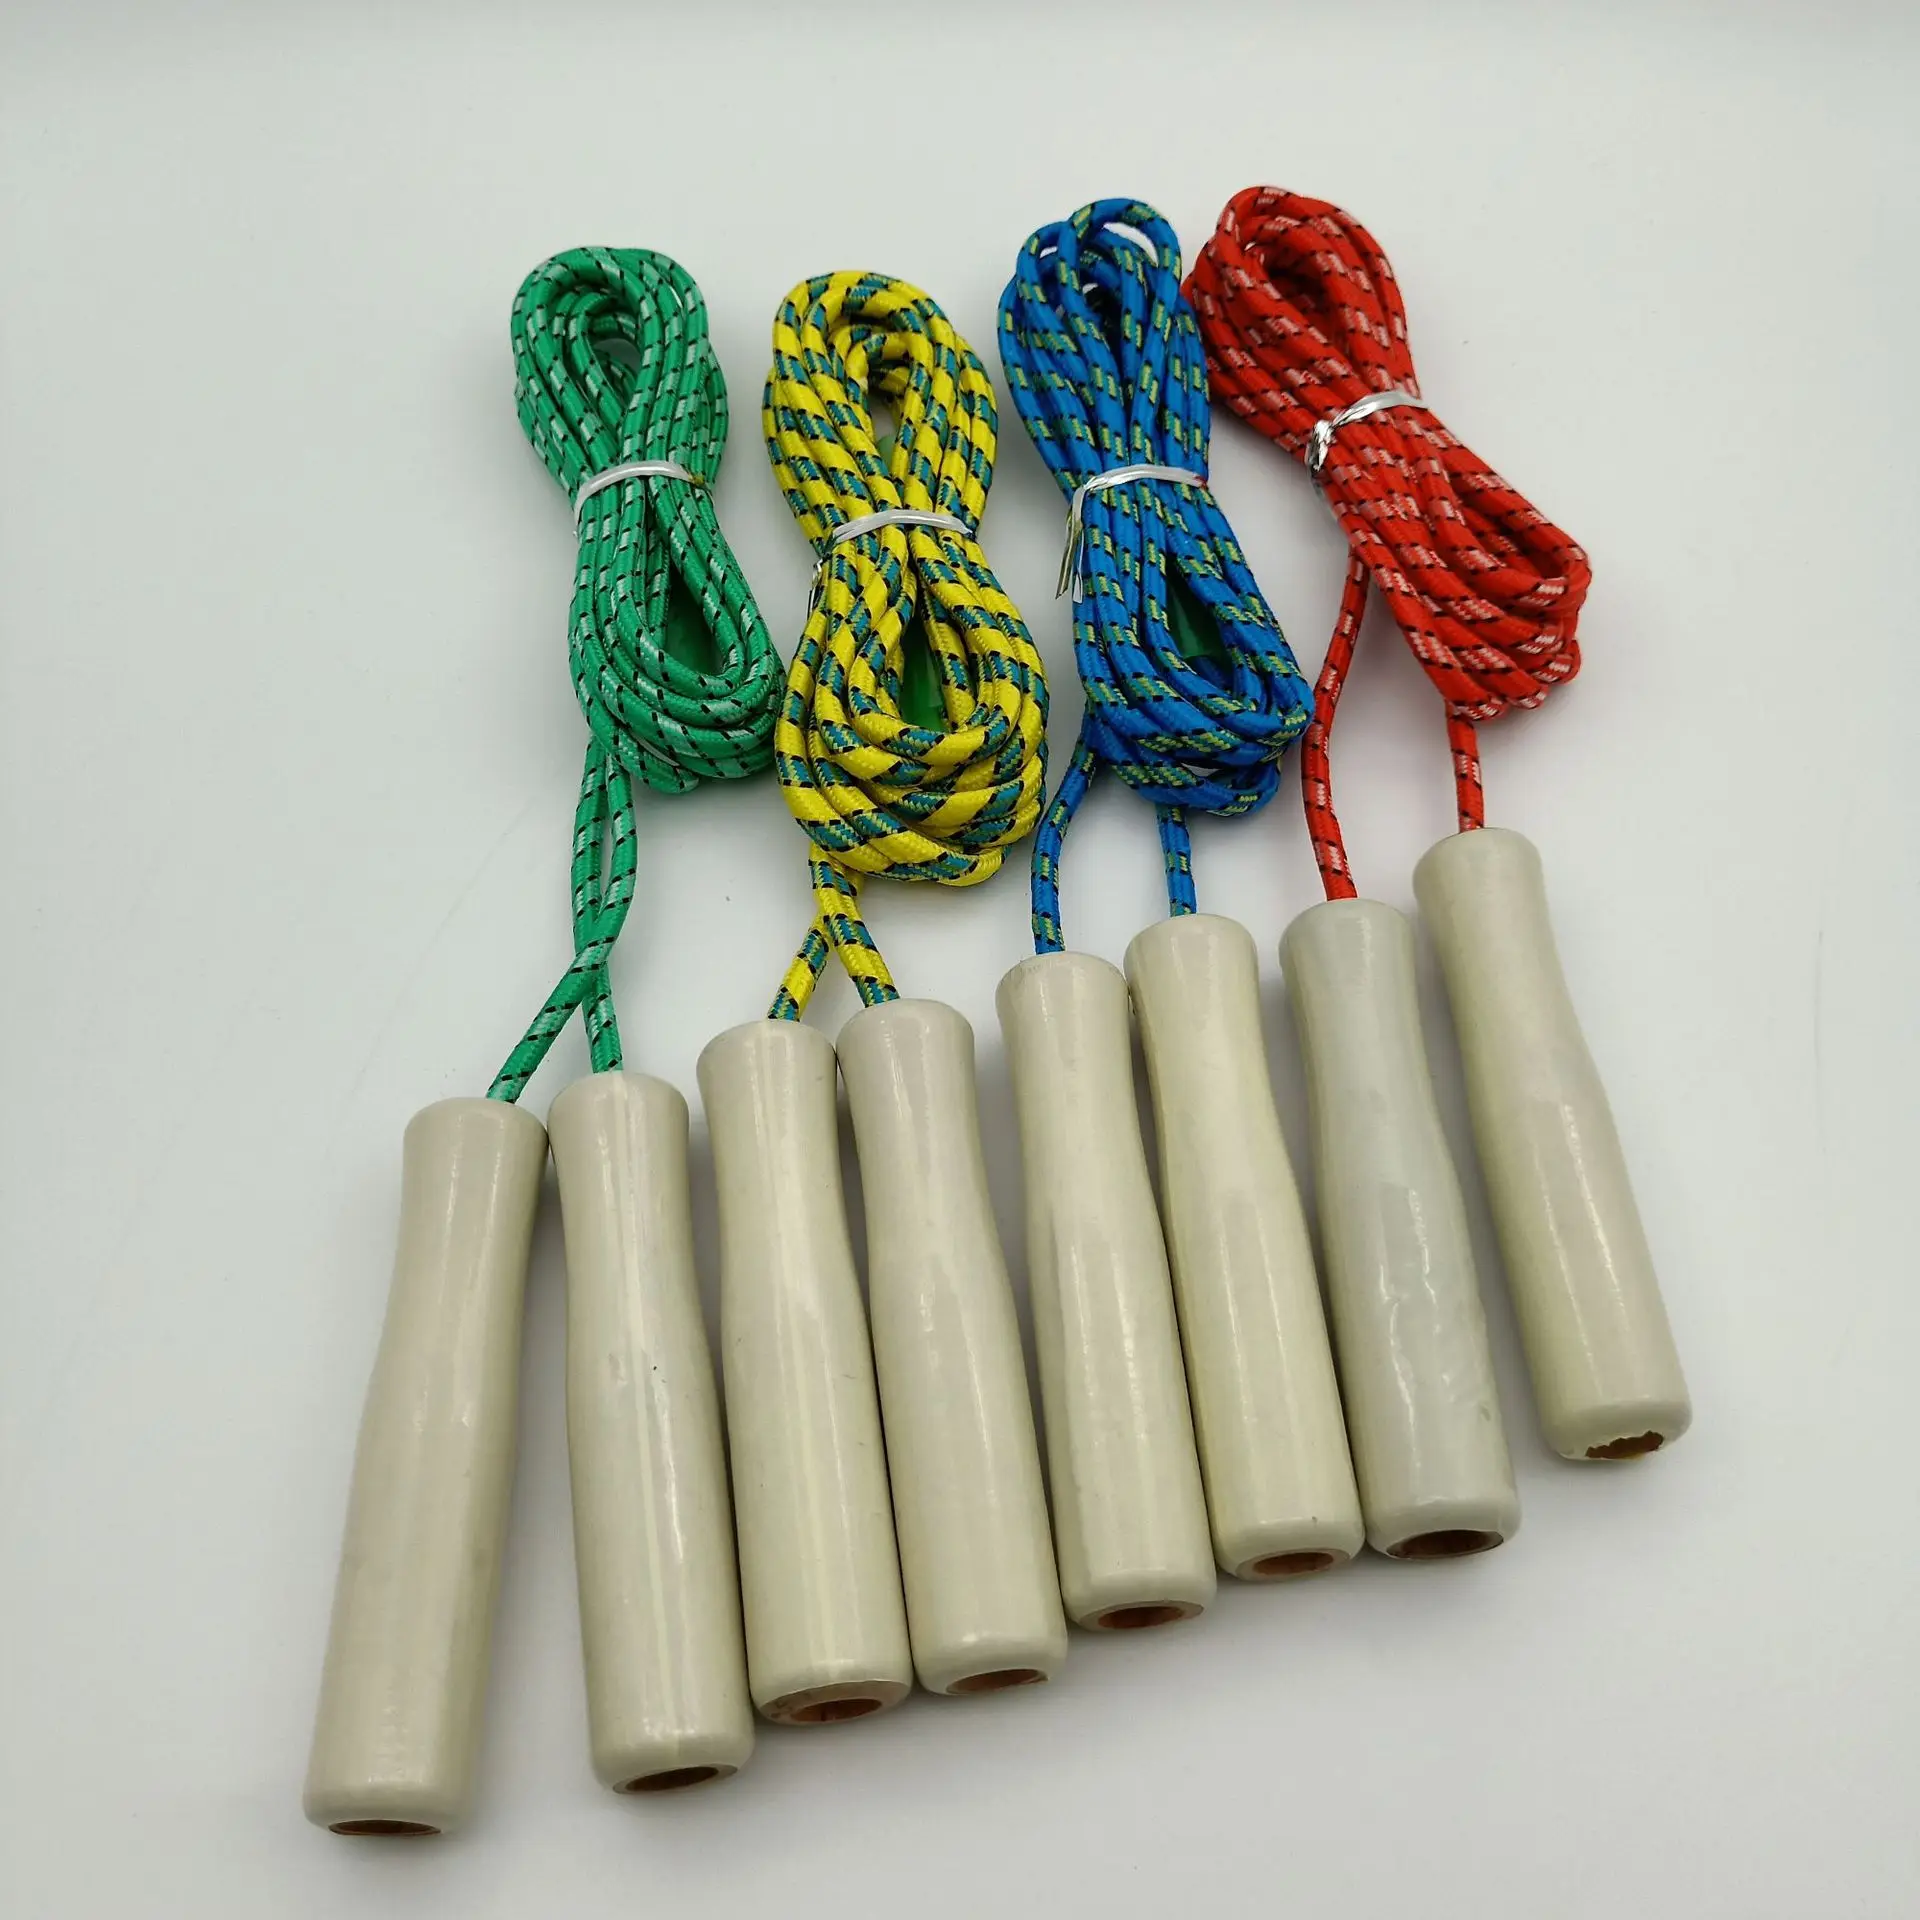 African Ghanaian Wooden Skipping Rope Exercise Jumping Game Fitnes Random Color 